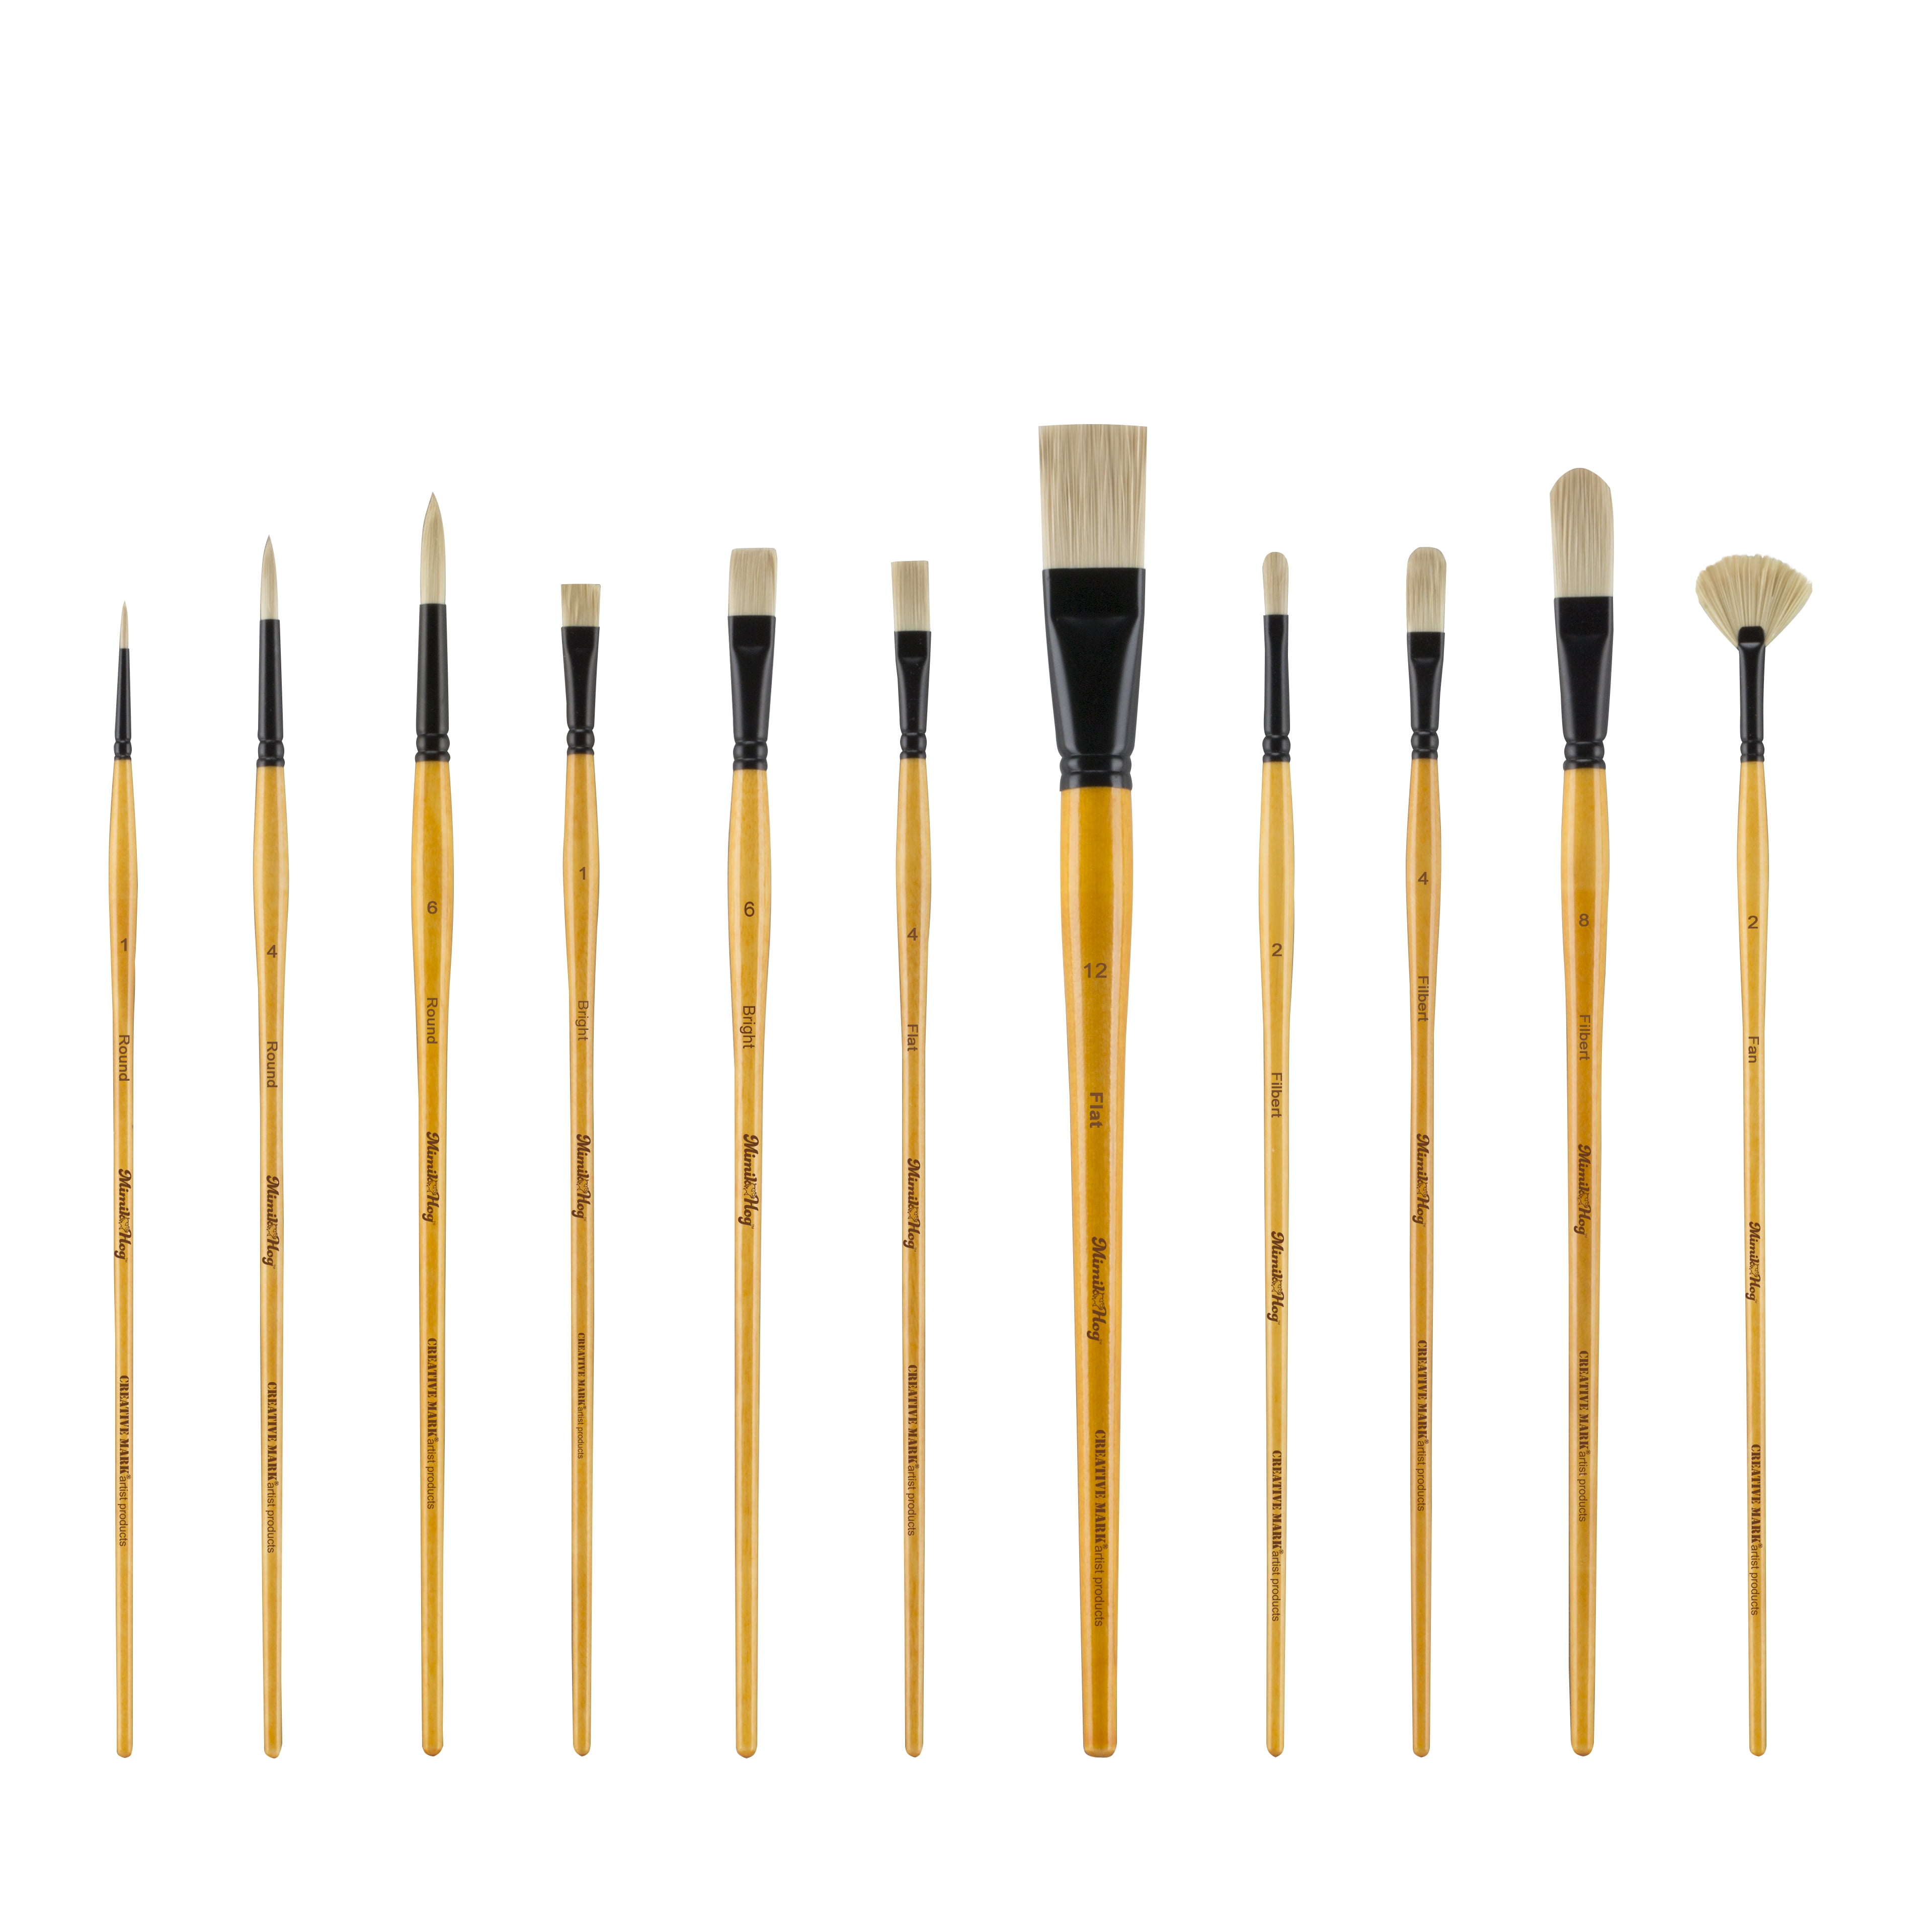 Creative Mark Art Brushes in Art Painting Supplies 